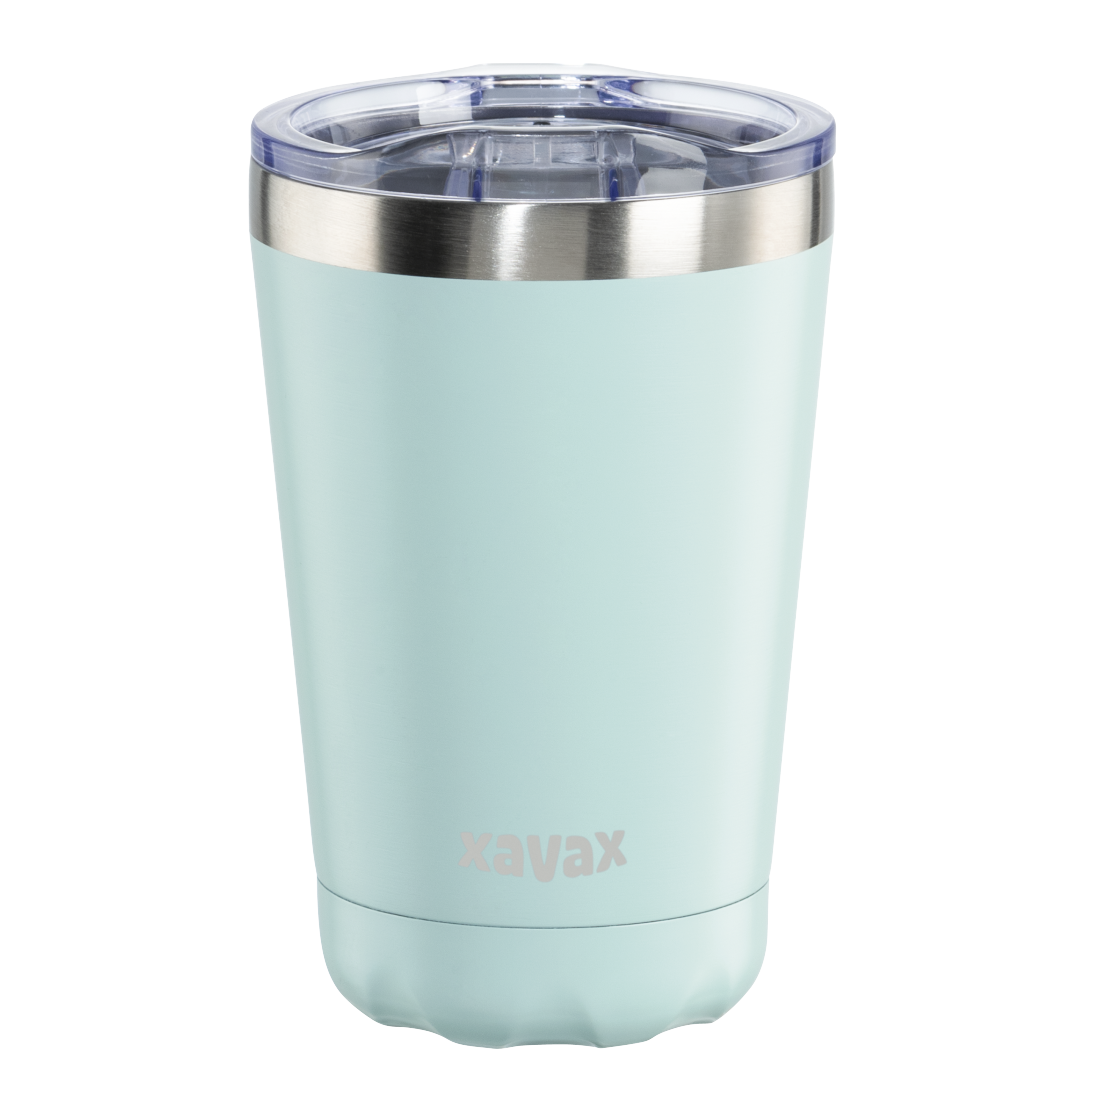 abx High-Res Image - Xavax, Thermal Mug, 270 ml, Insulated Mug To Go with Drinks Opening, pastel blue